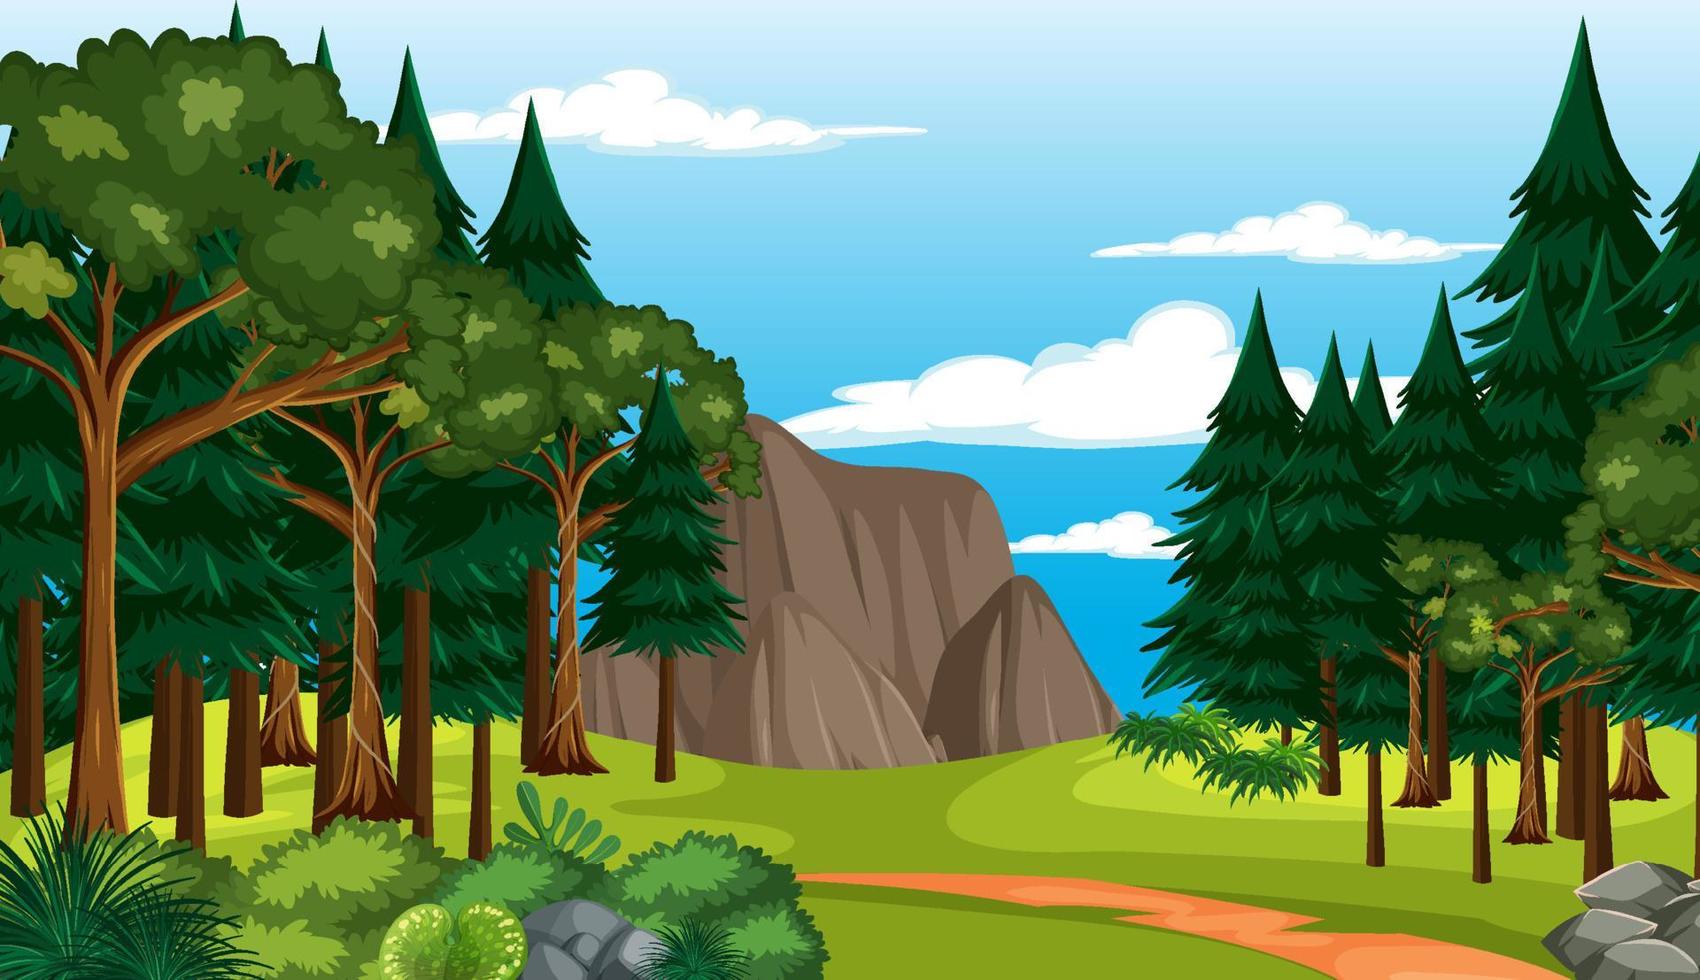 Empty forest environment background vector